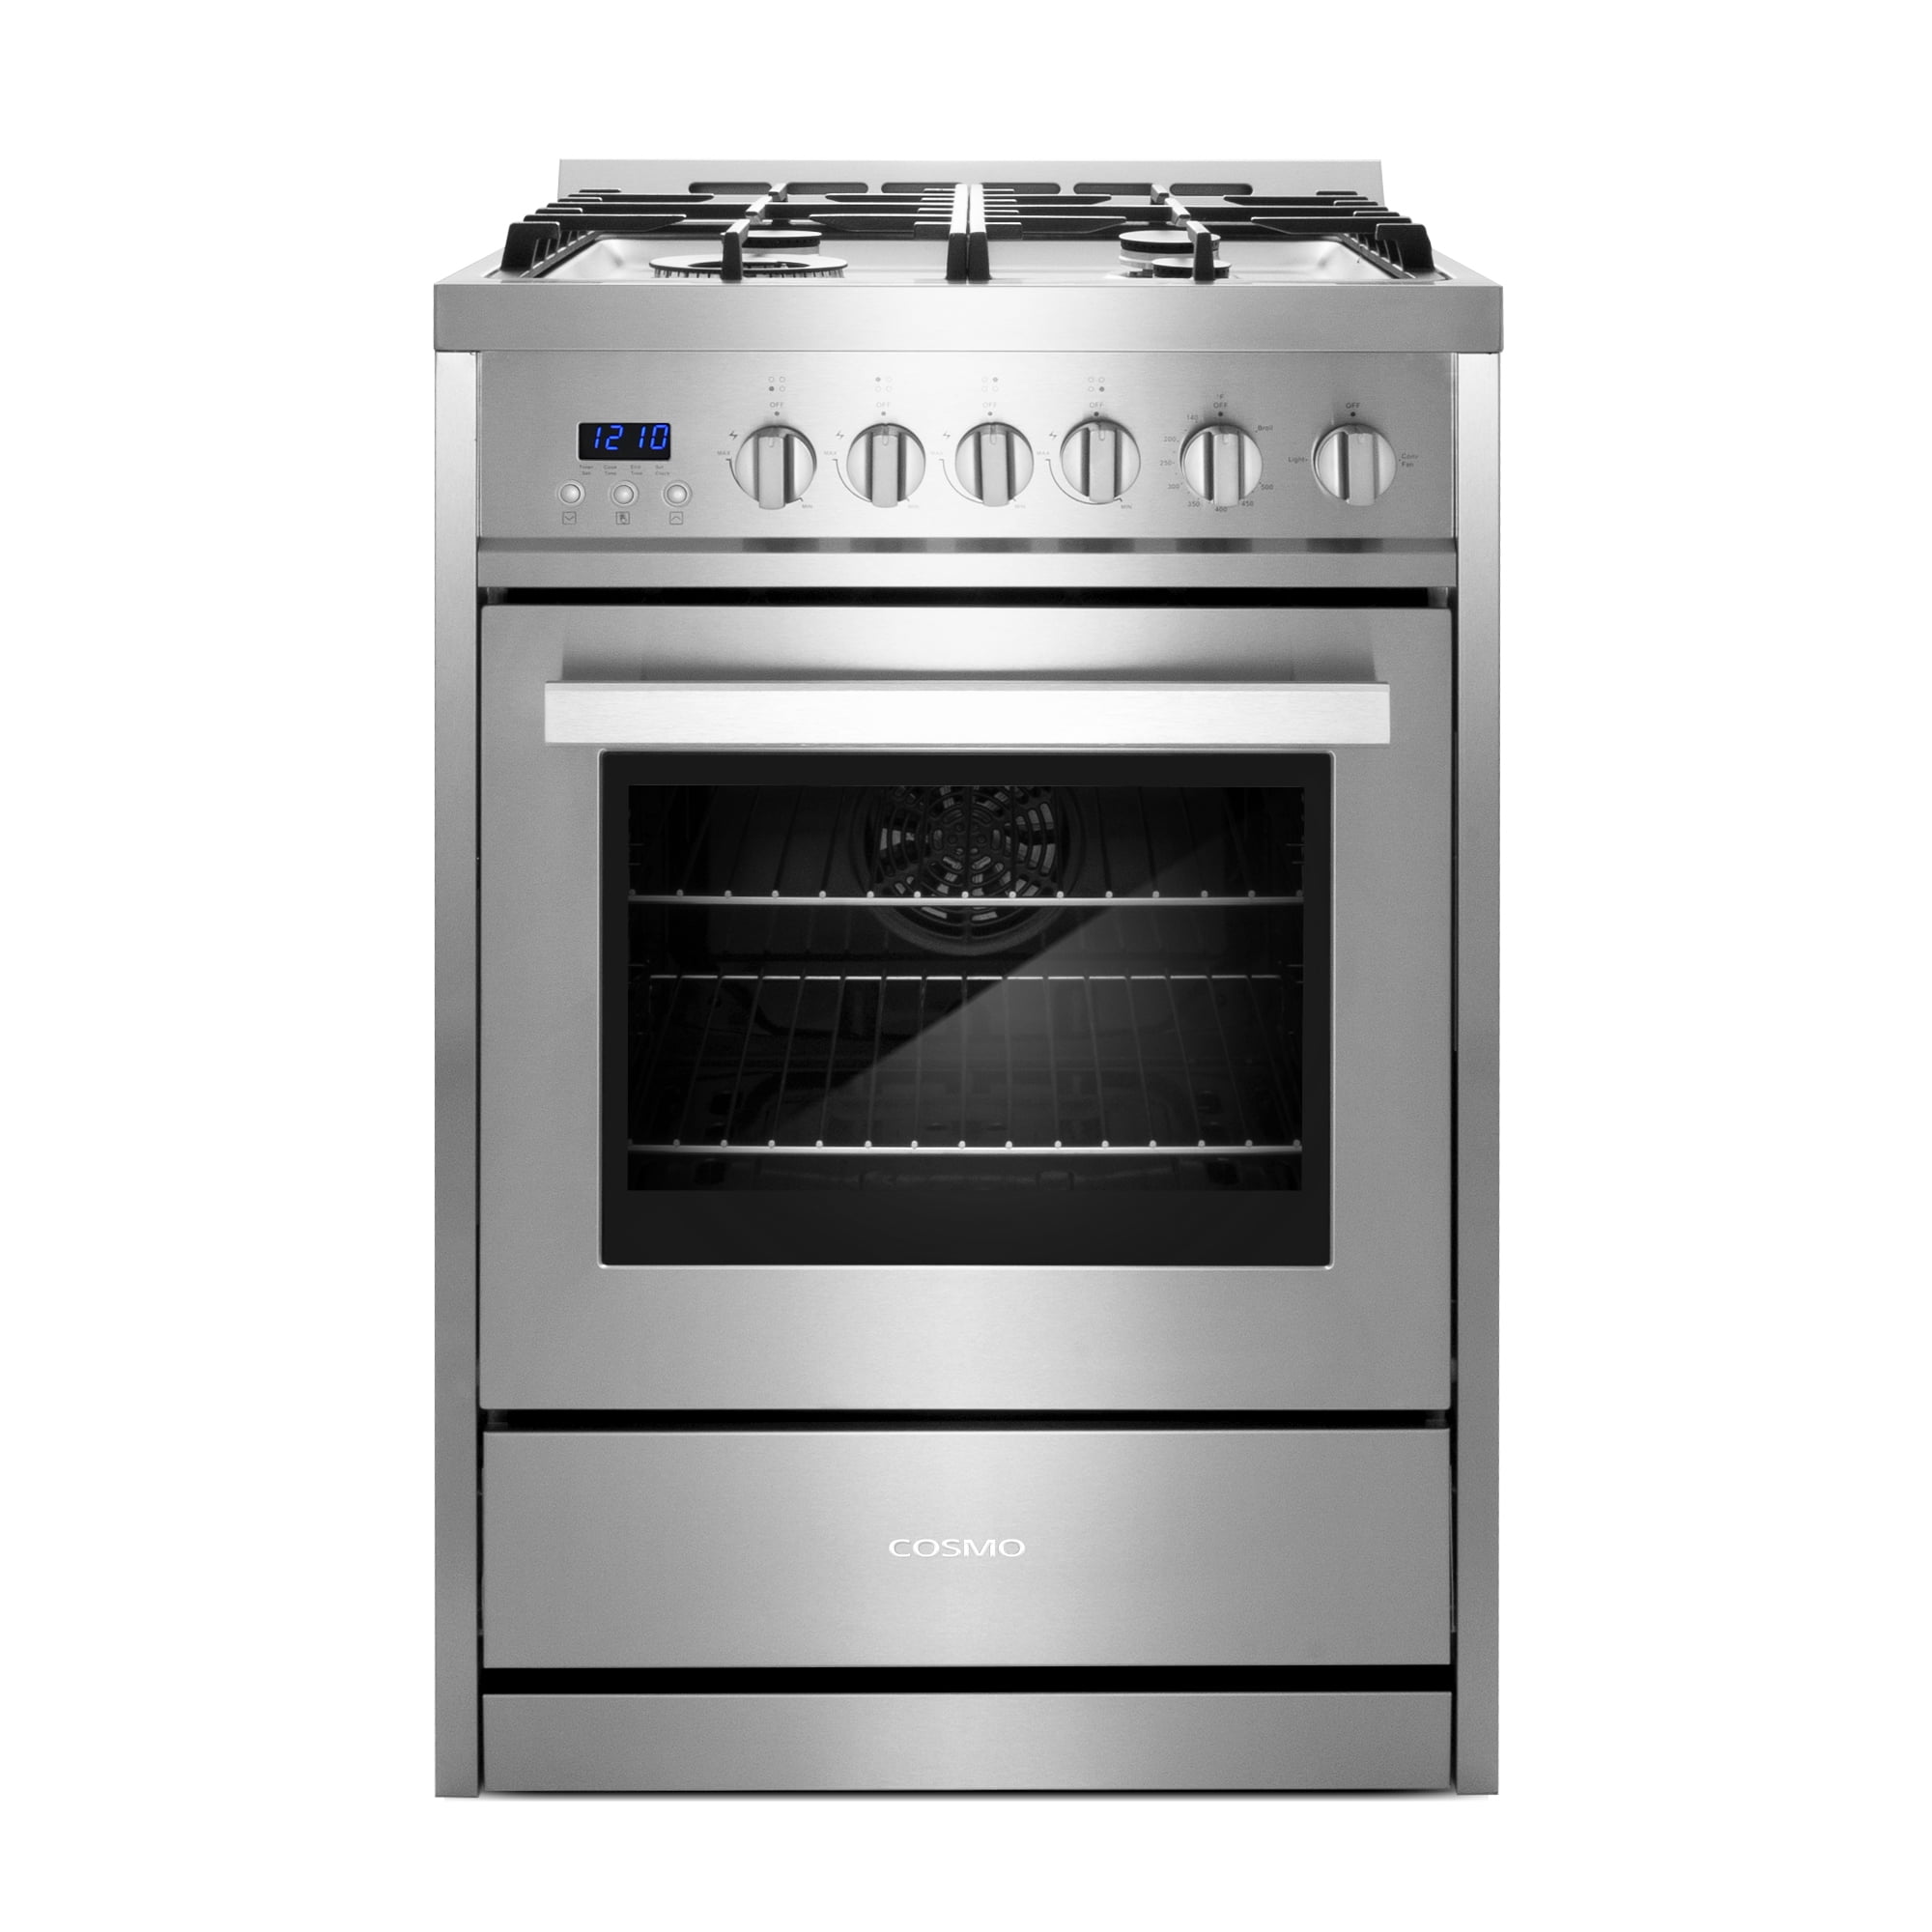 Cosmo 2.73 cu. ft. Single Oven Gas Range Kitchen Stove with 4 Burner Cooktop, Duty Cast Iron Grates in Stainless - Walmart.com